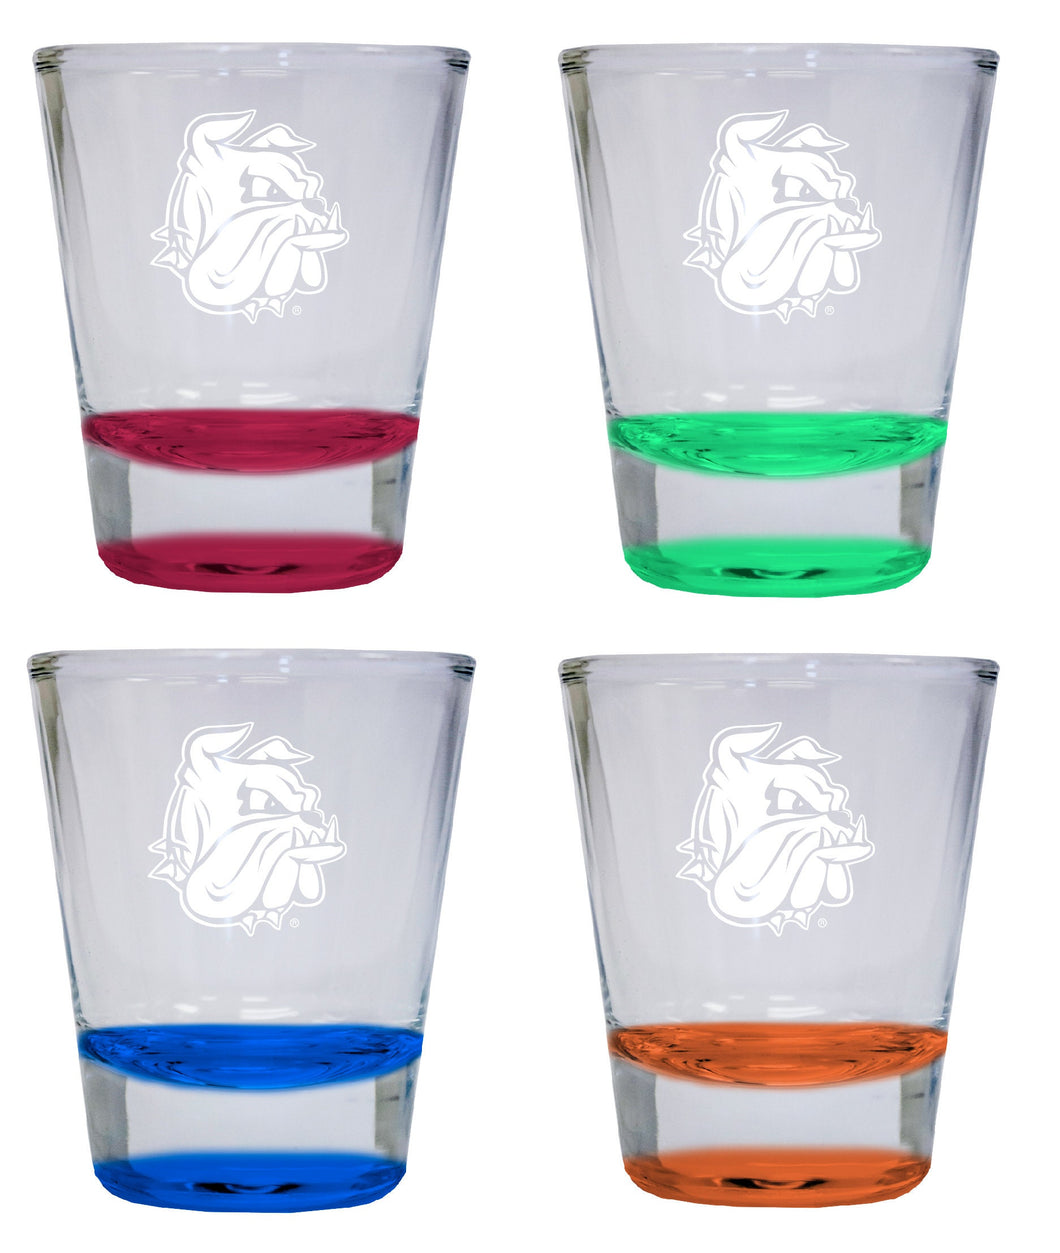 NCAA Minnesota Duluth Bulldogs Collector's 2oz Laser-Engraved Spirit Shot Glass Red, Orange, Blue and Green 4-Pack